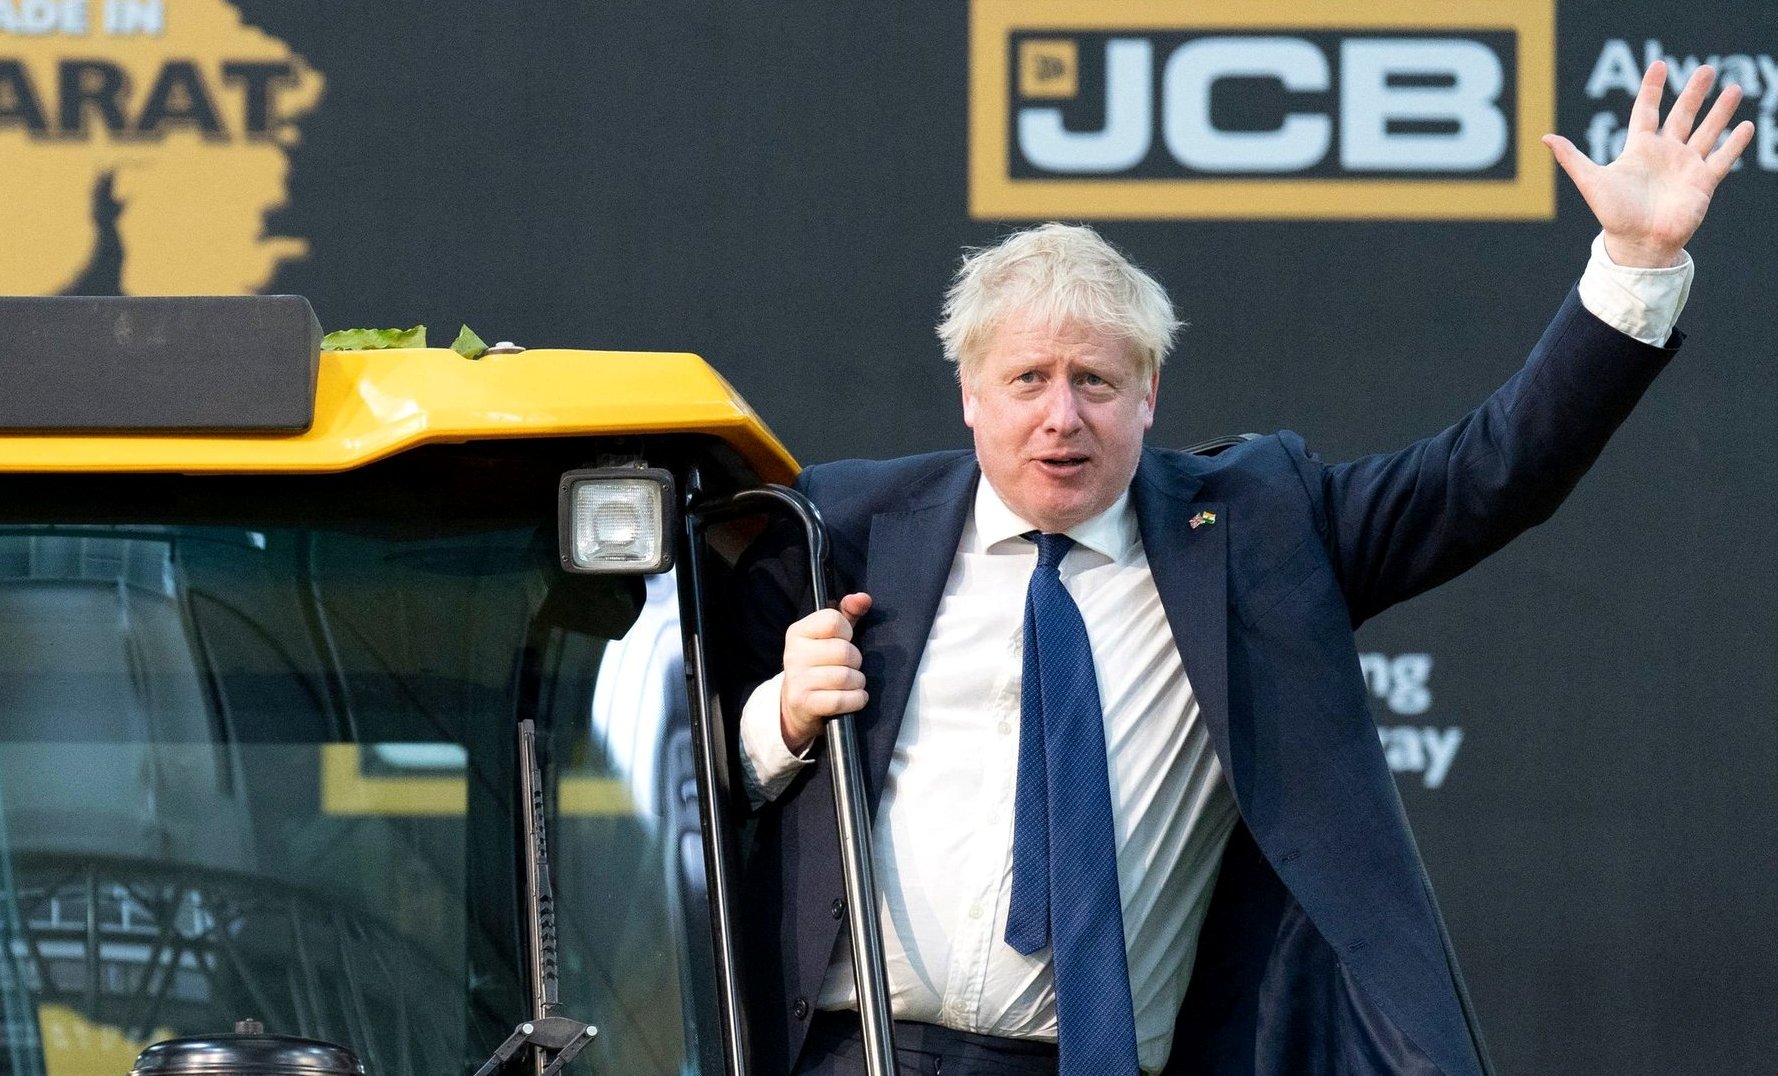 UK PM Officially Opened JCB’s Newest Factory in India